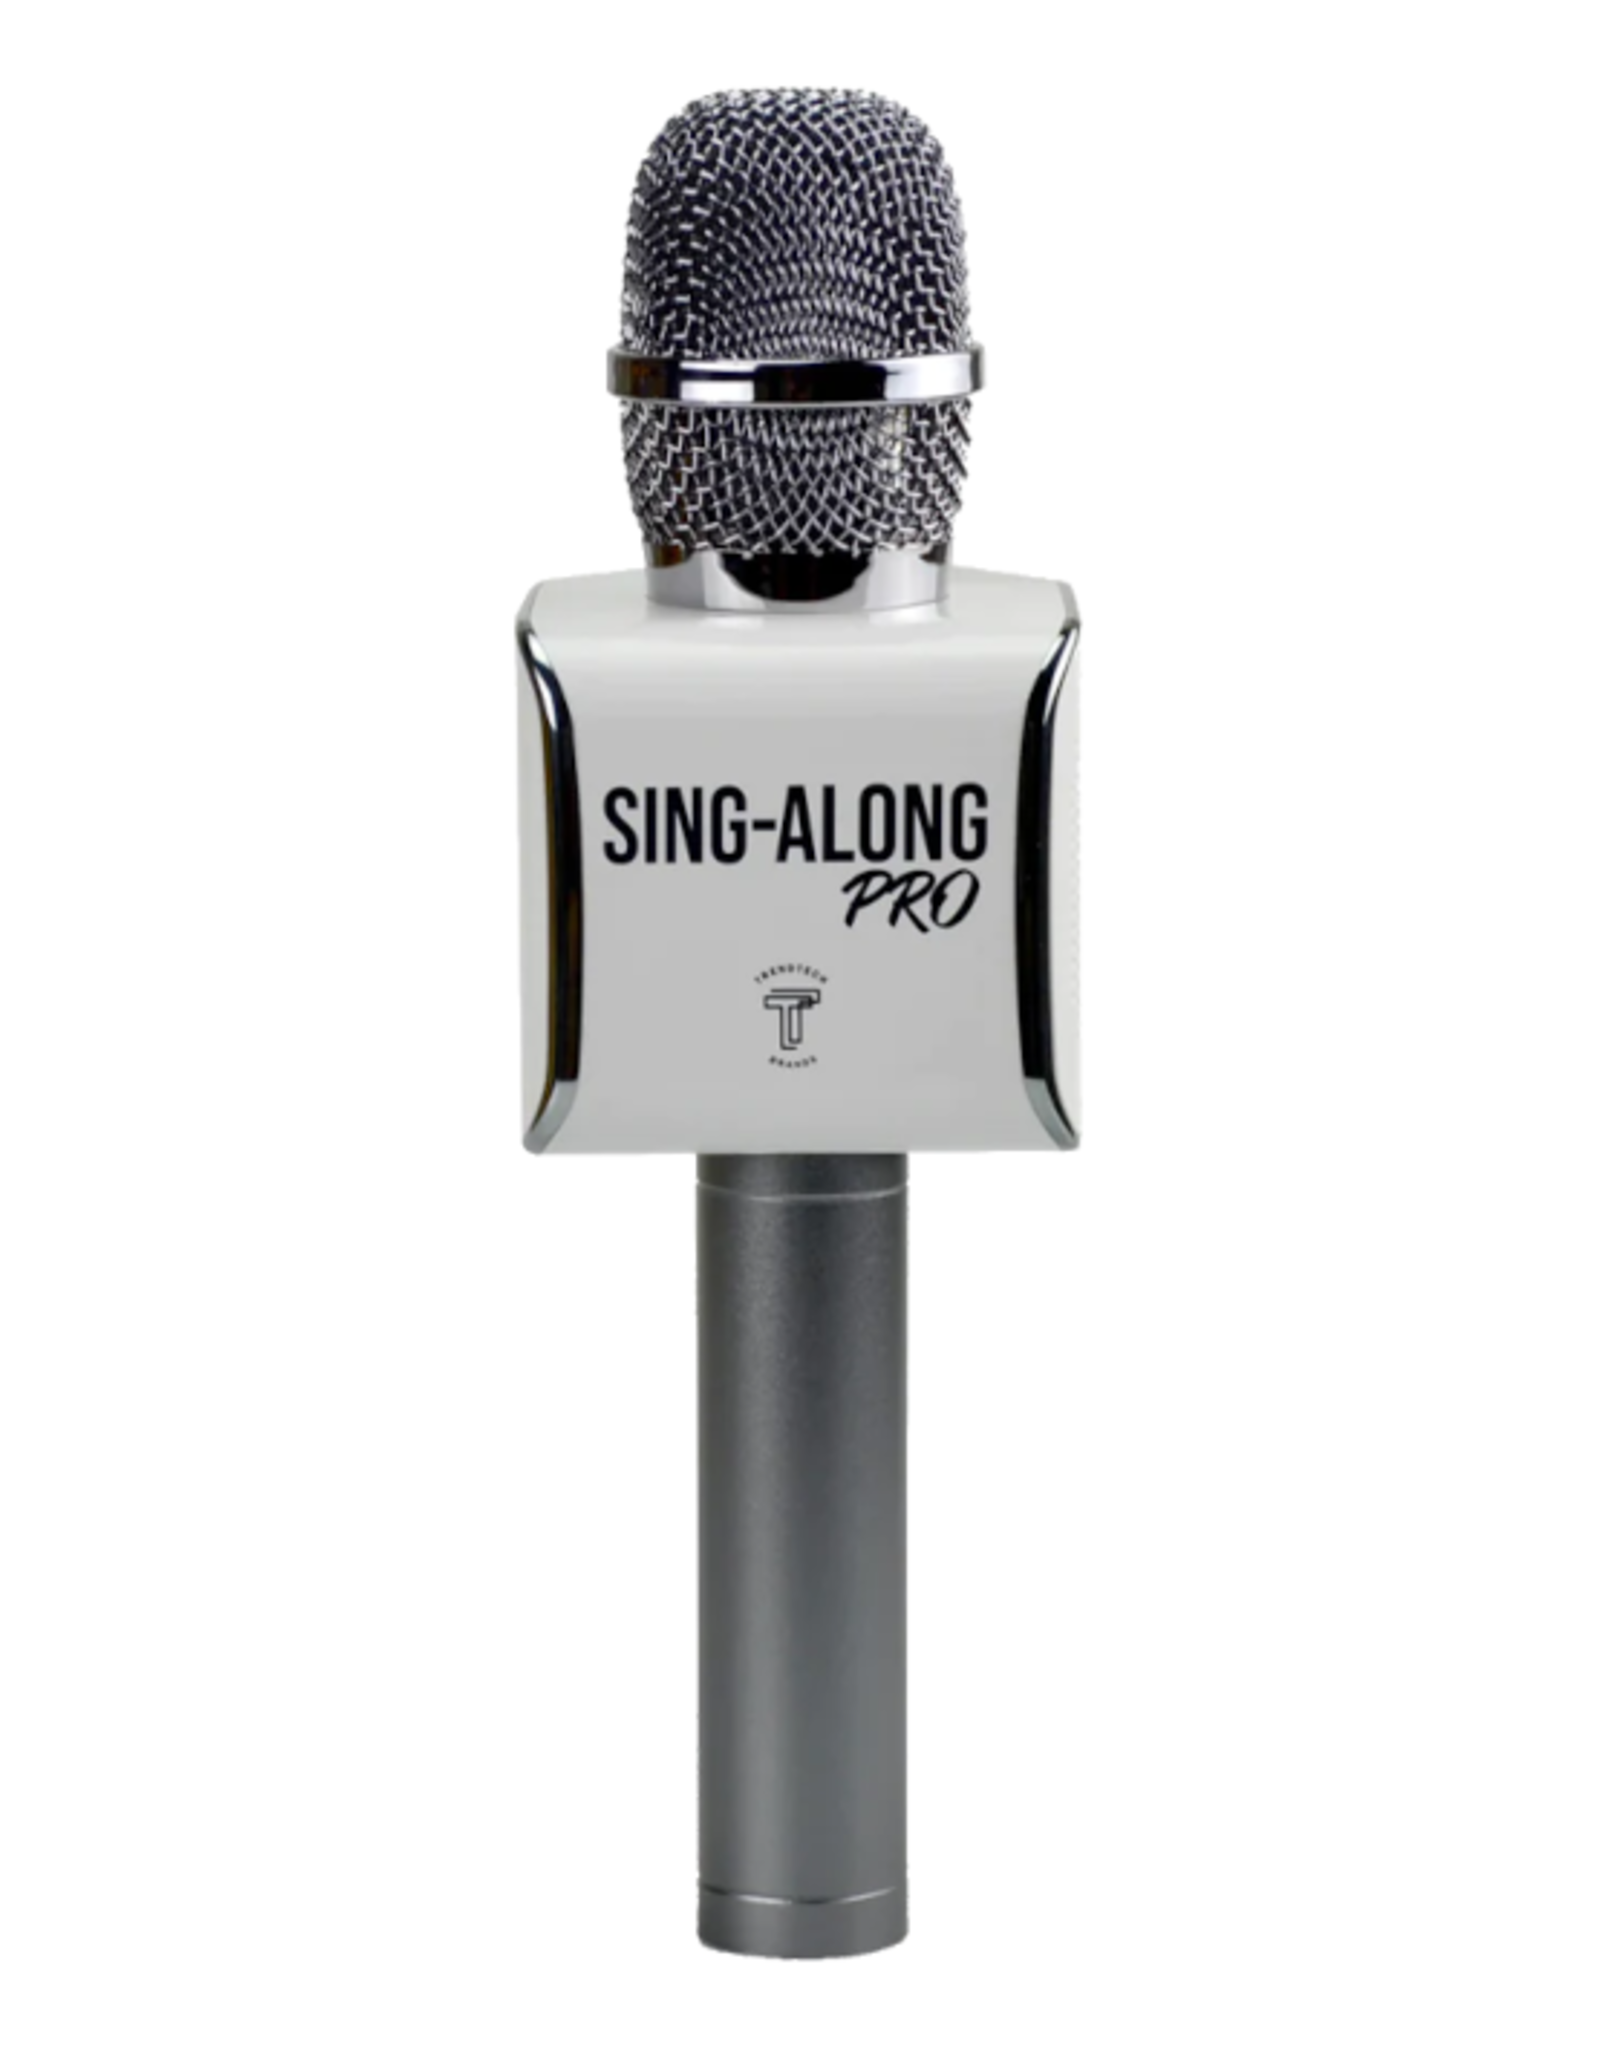 Sing-along PRO 3 Karaoke Microphone and Bluetooth Speaker All-in-one